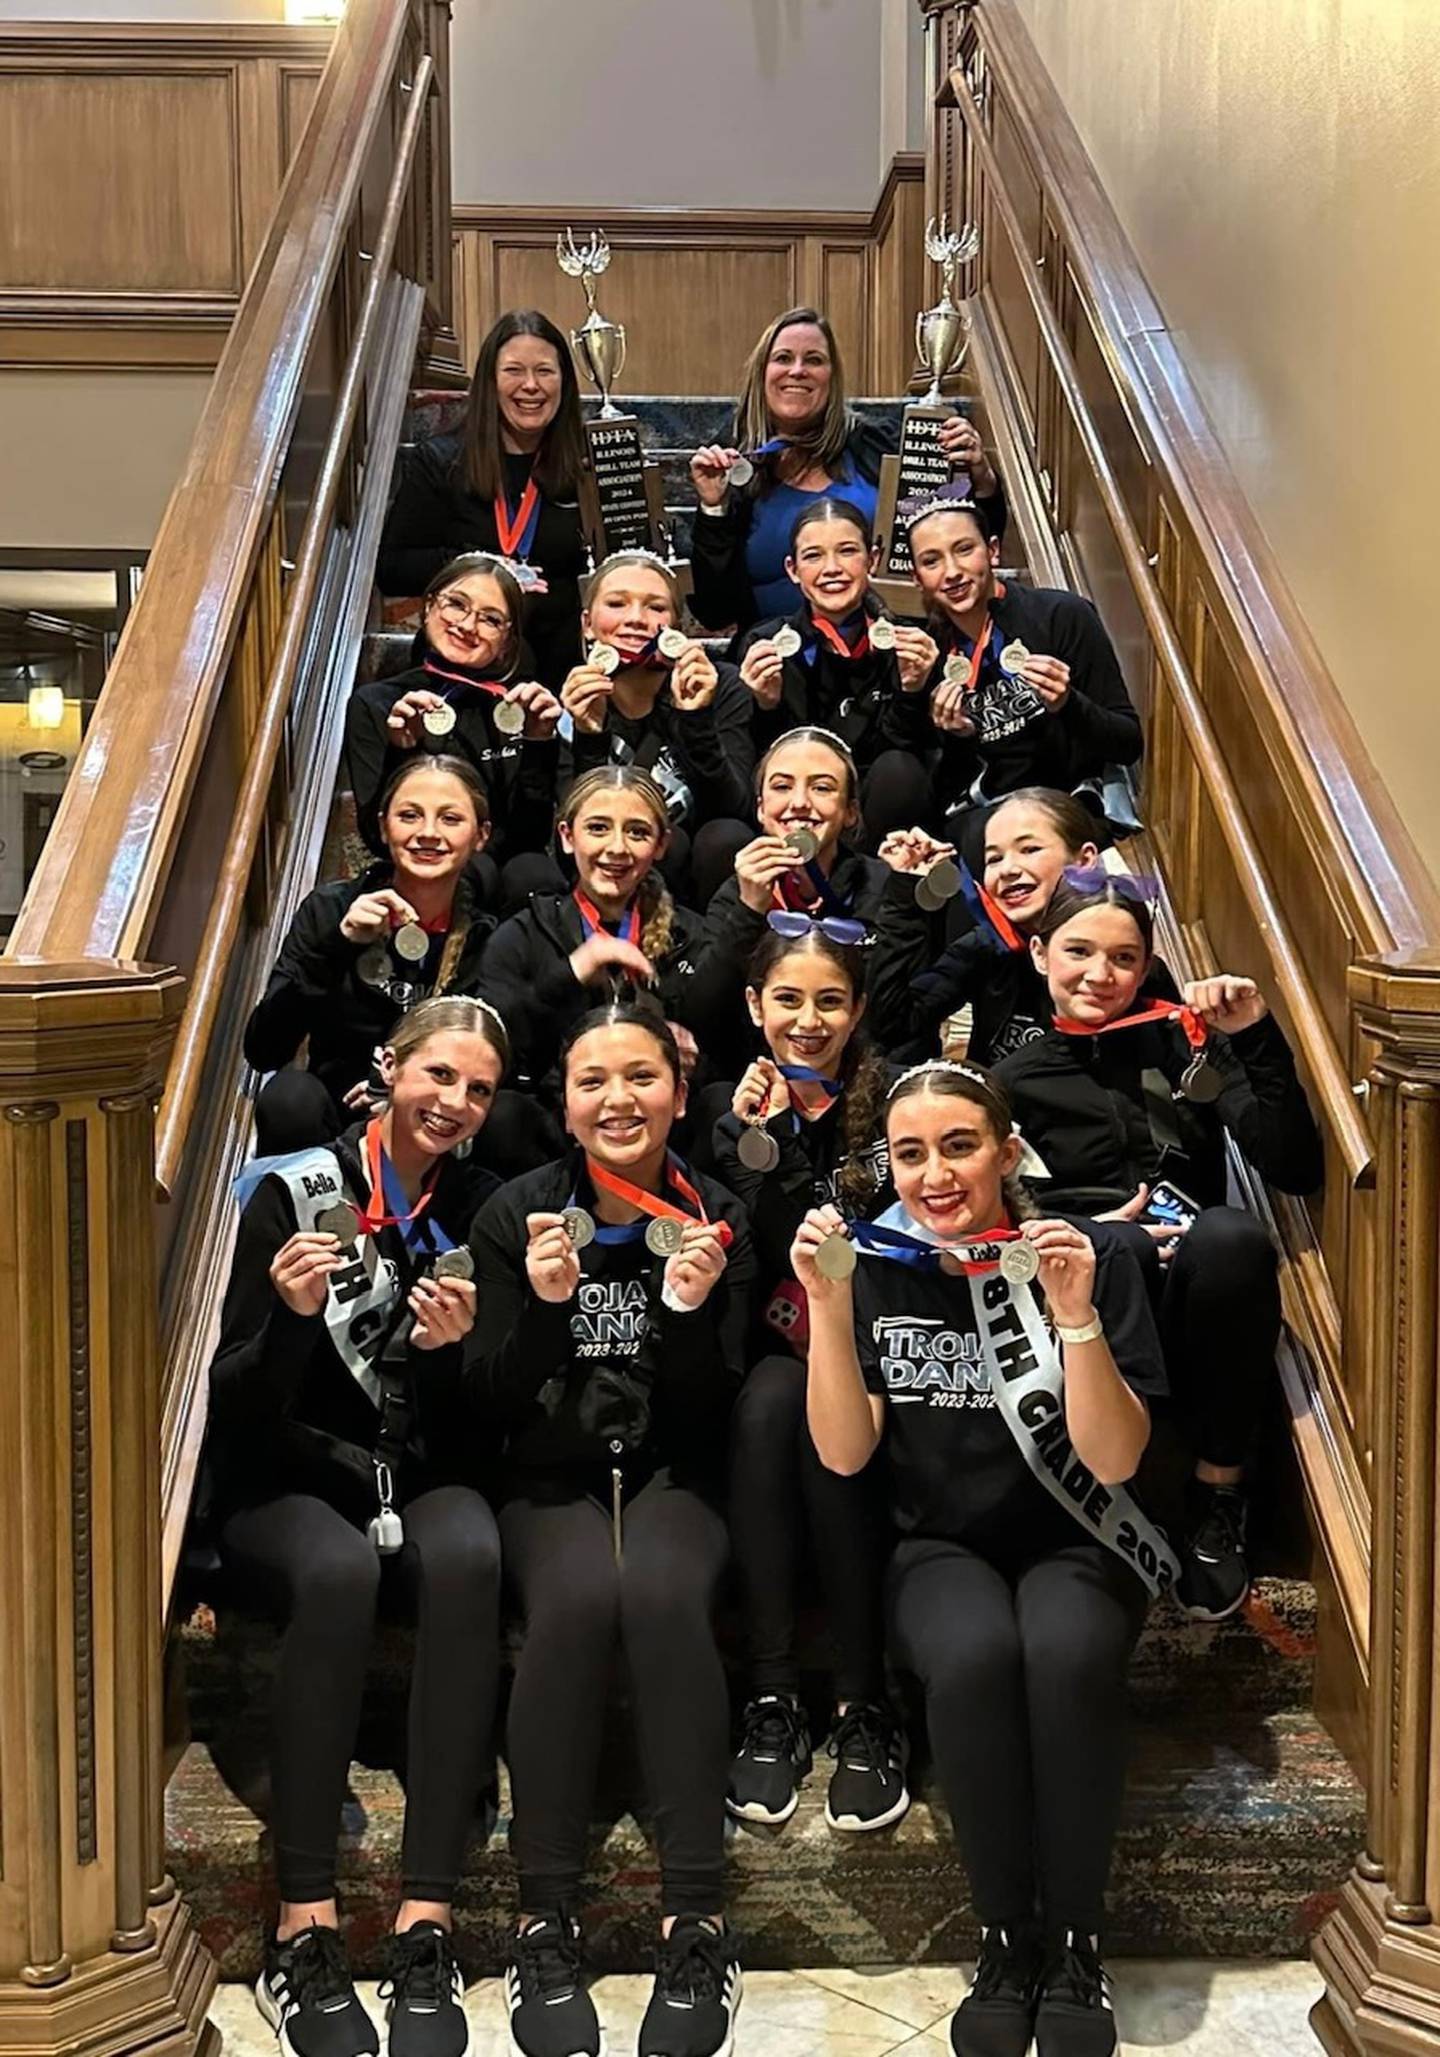 Members of the Troy Middle School dance team show off their medals after their state championship performance on Feb. 10.